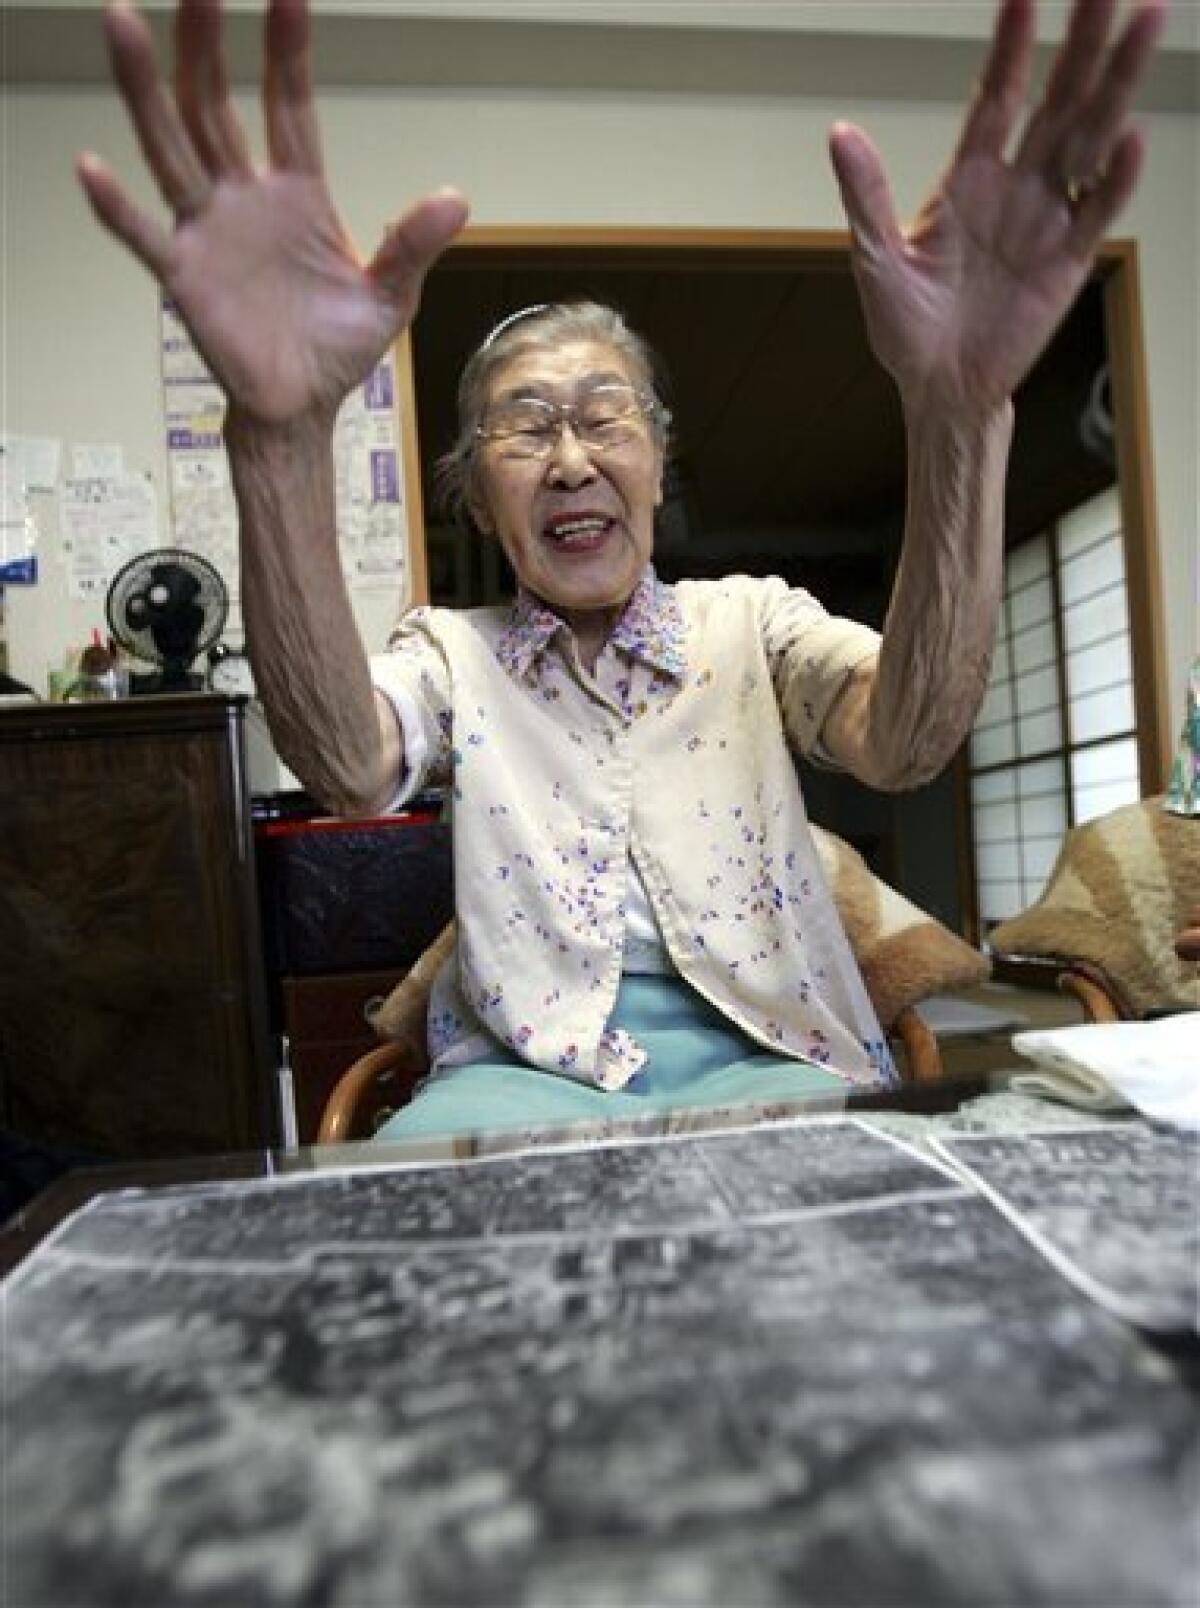 In this July 29, 2006 file photo, with aerial photos of the city of Tokyo, Toyo Ishii, a former military nurse, speaks about Unit 731, Japan's germ and biological warfare outfit during World War II, at her home in Tokyo. Japan is launching a land survey that may dig up evidence of its grisly WWII secrets. The excavation begins Monday, Feb. 21, 2011, at the former site of a wartime medical school related to Tokyo's shadowy wartime experiments on live prisoners of war, an atrocity Japan's government has never officially recognized but well documented by historians and participants. The first government probe of the site linked to Unit 731 follows Ishii's revelation five years ago. (AP Photo/Itsuo Inouye, File)